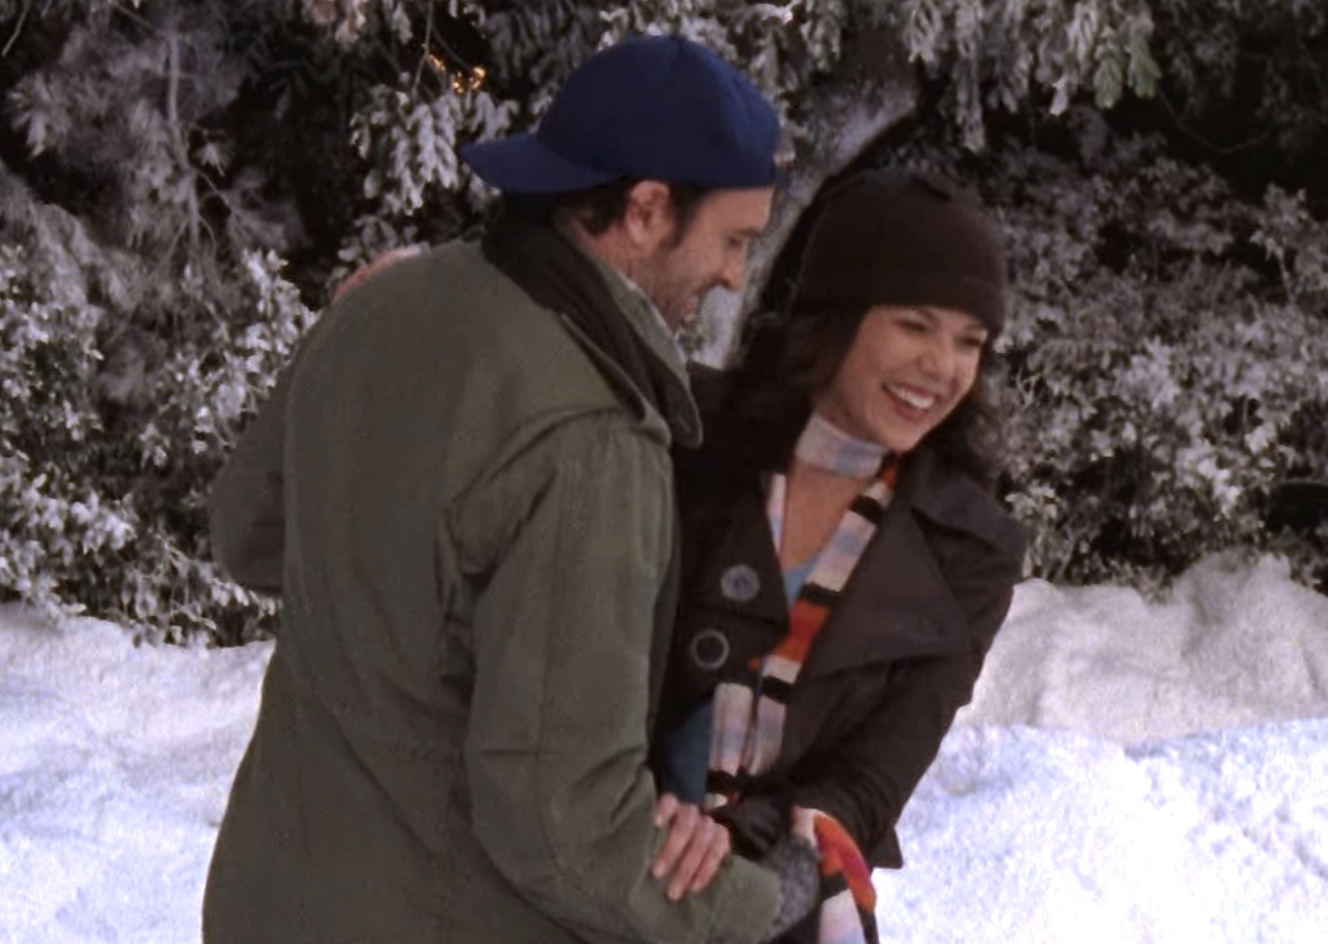 Luke smiles and he helps a laughing Lorelai up onto the slick, icy ground